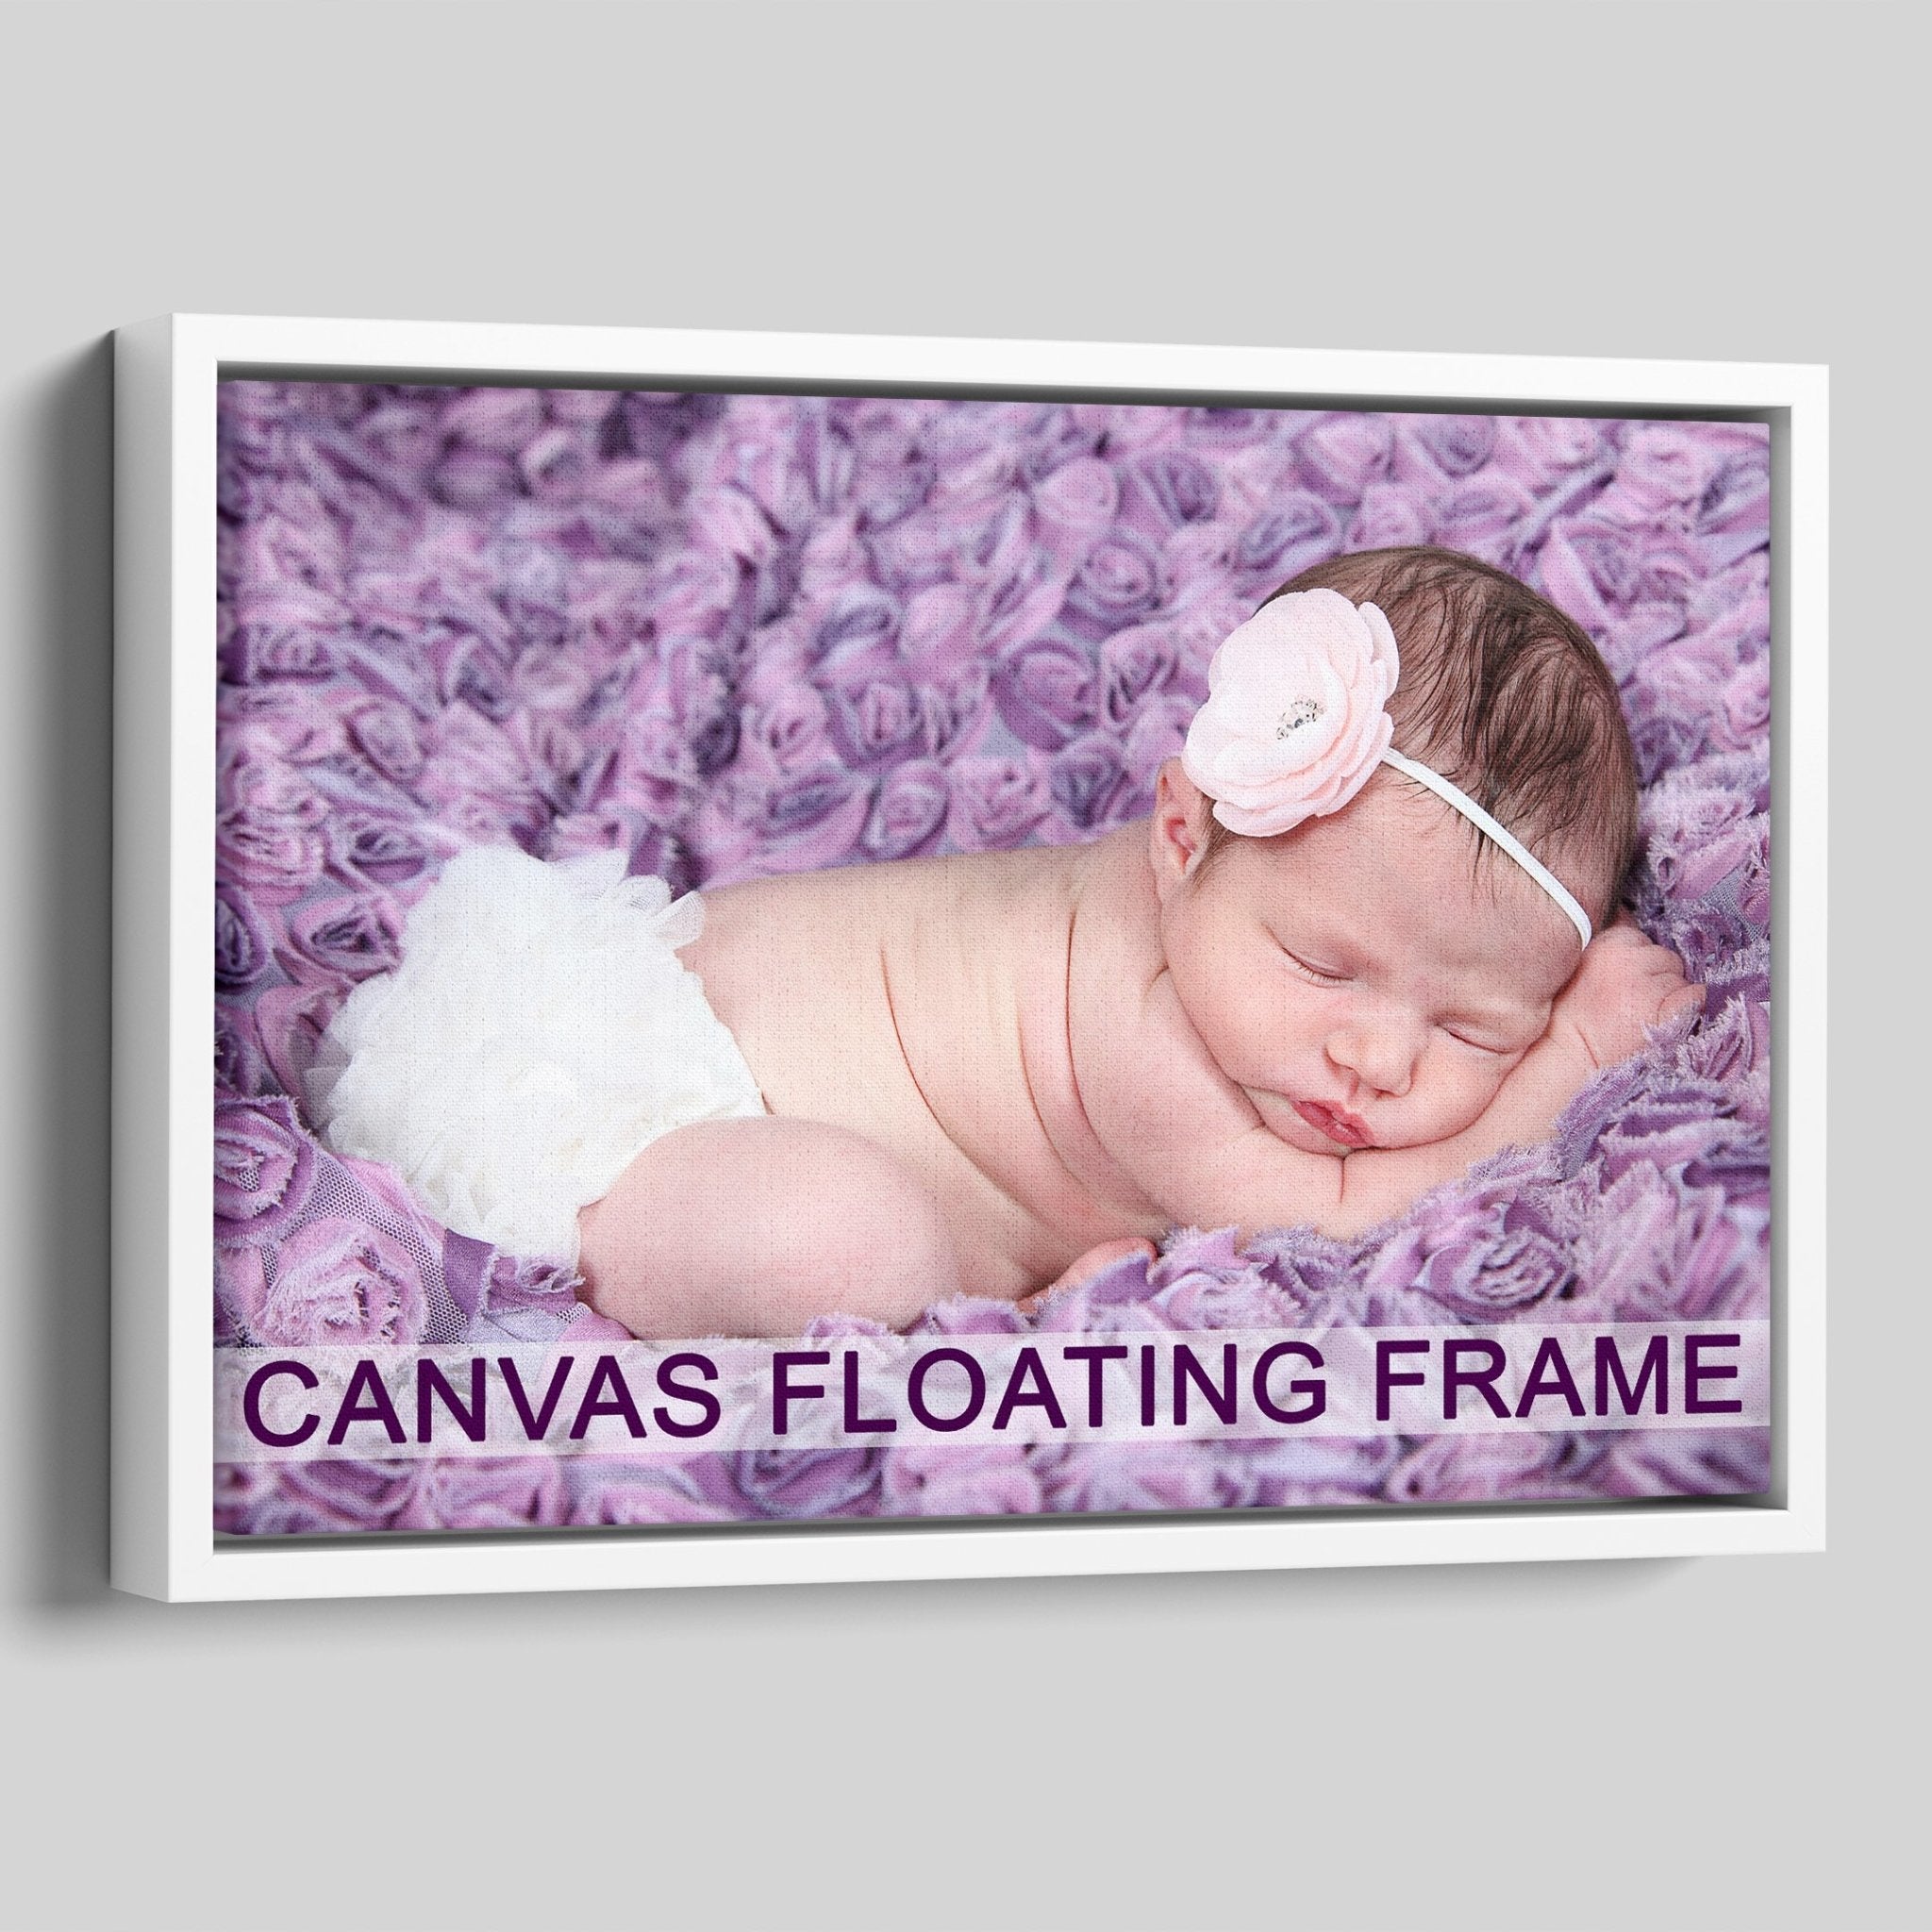 Floating Frame for 16x24 inch Canvas Painting 1-1/4 inch Deep 4 Color Picture Art Wall Decor White Frame Size 16 x 24